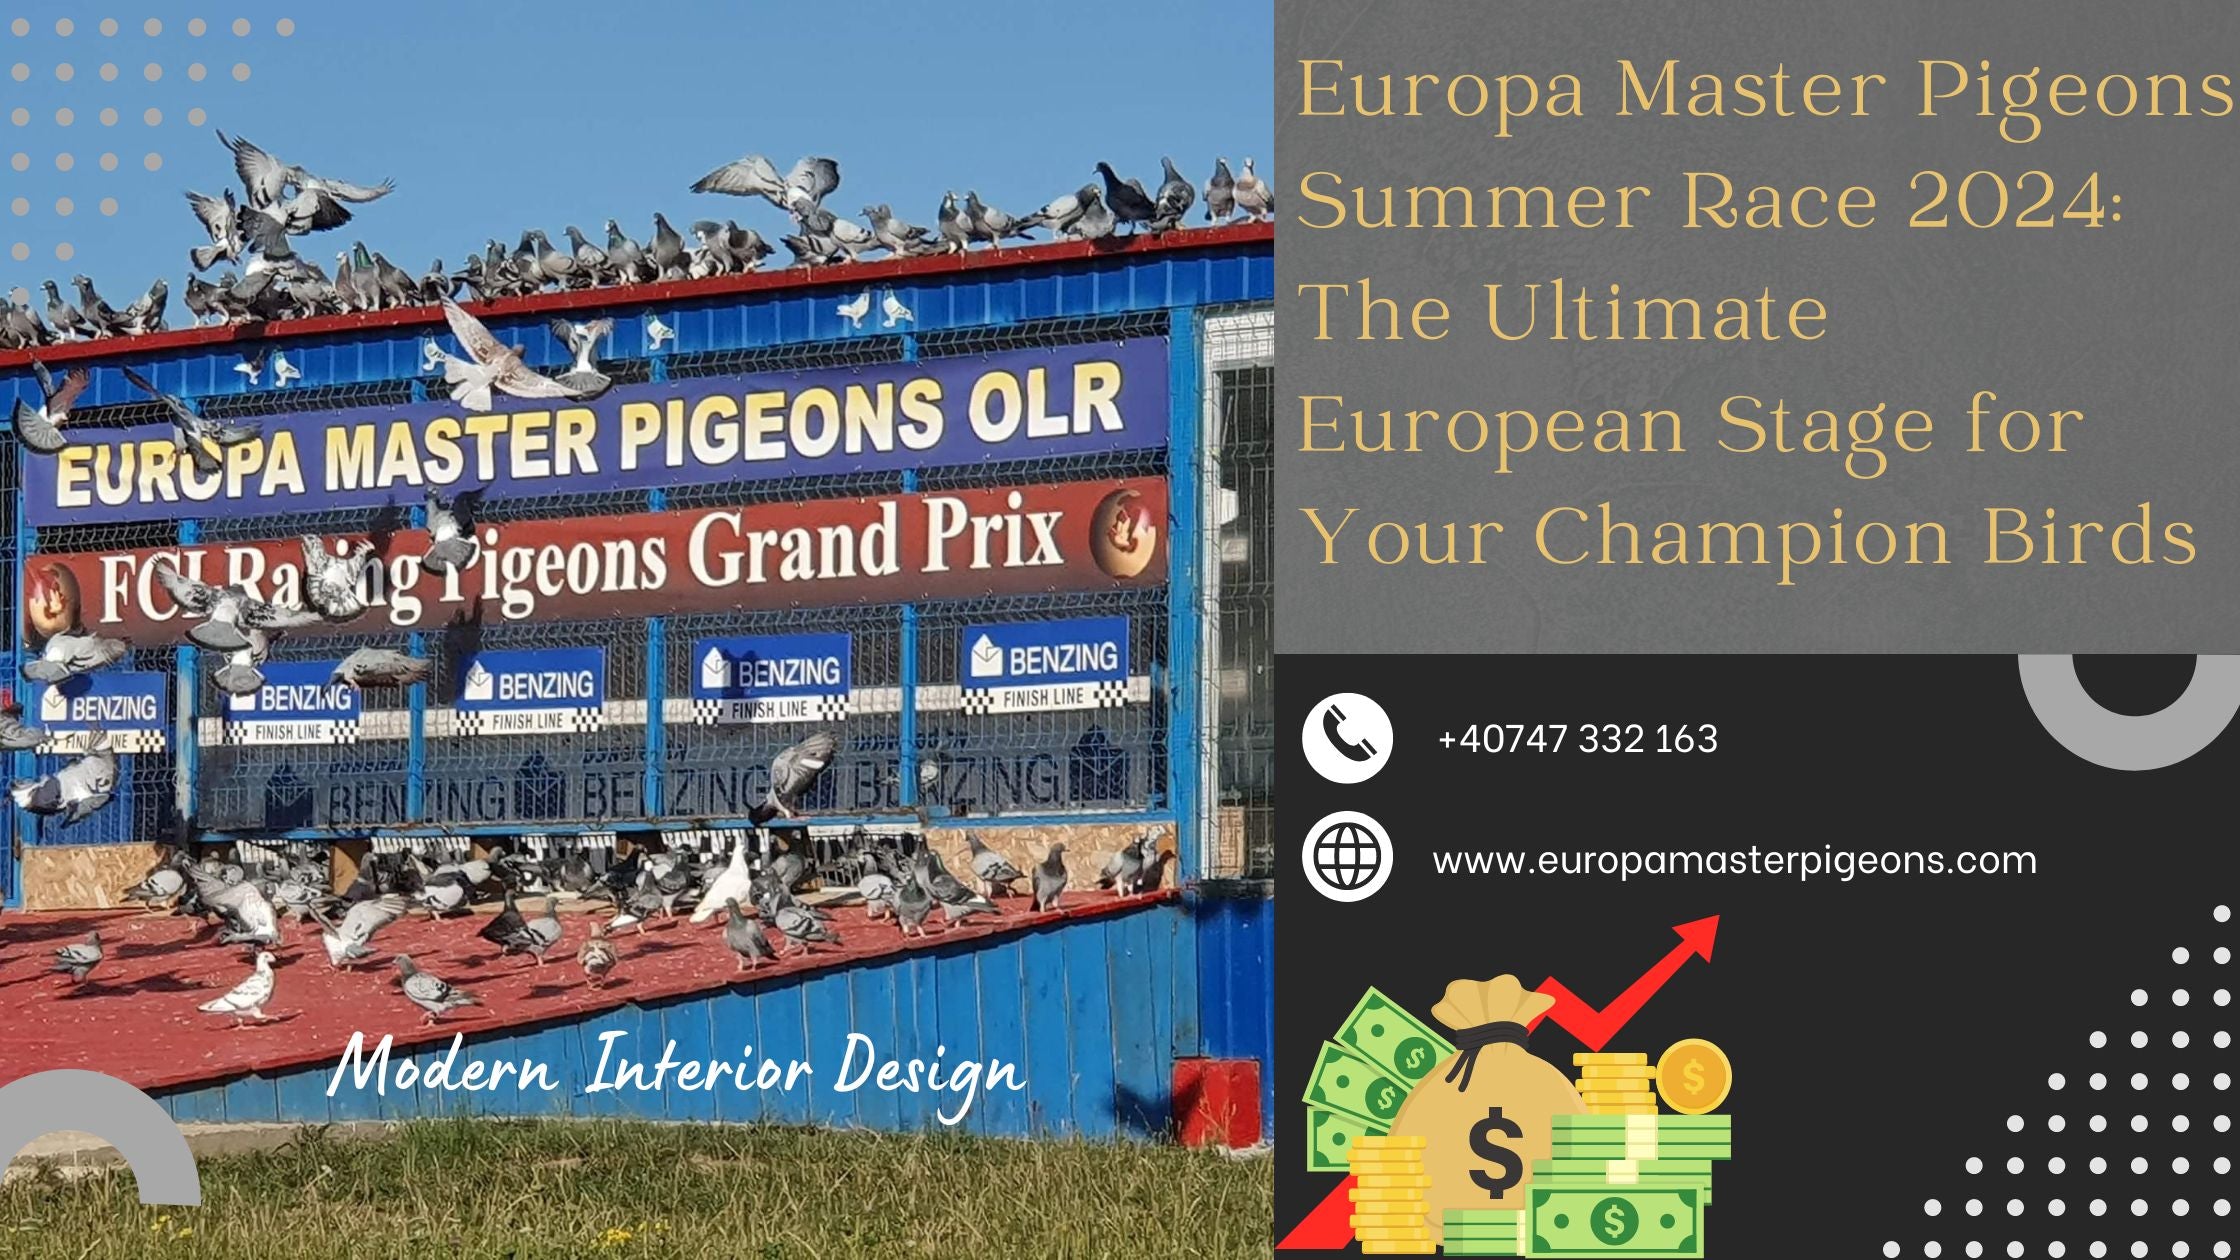 Europa Master Pigeons Summer Race 2024: The Ultimate European Stage for Your Champion Birds